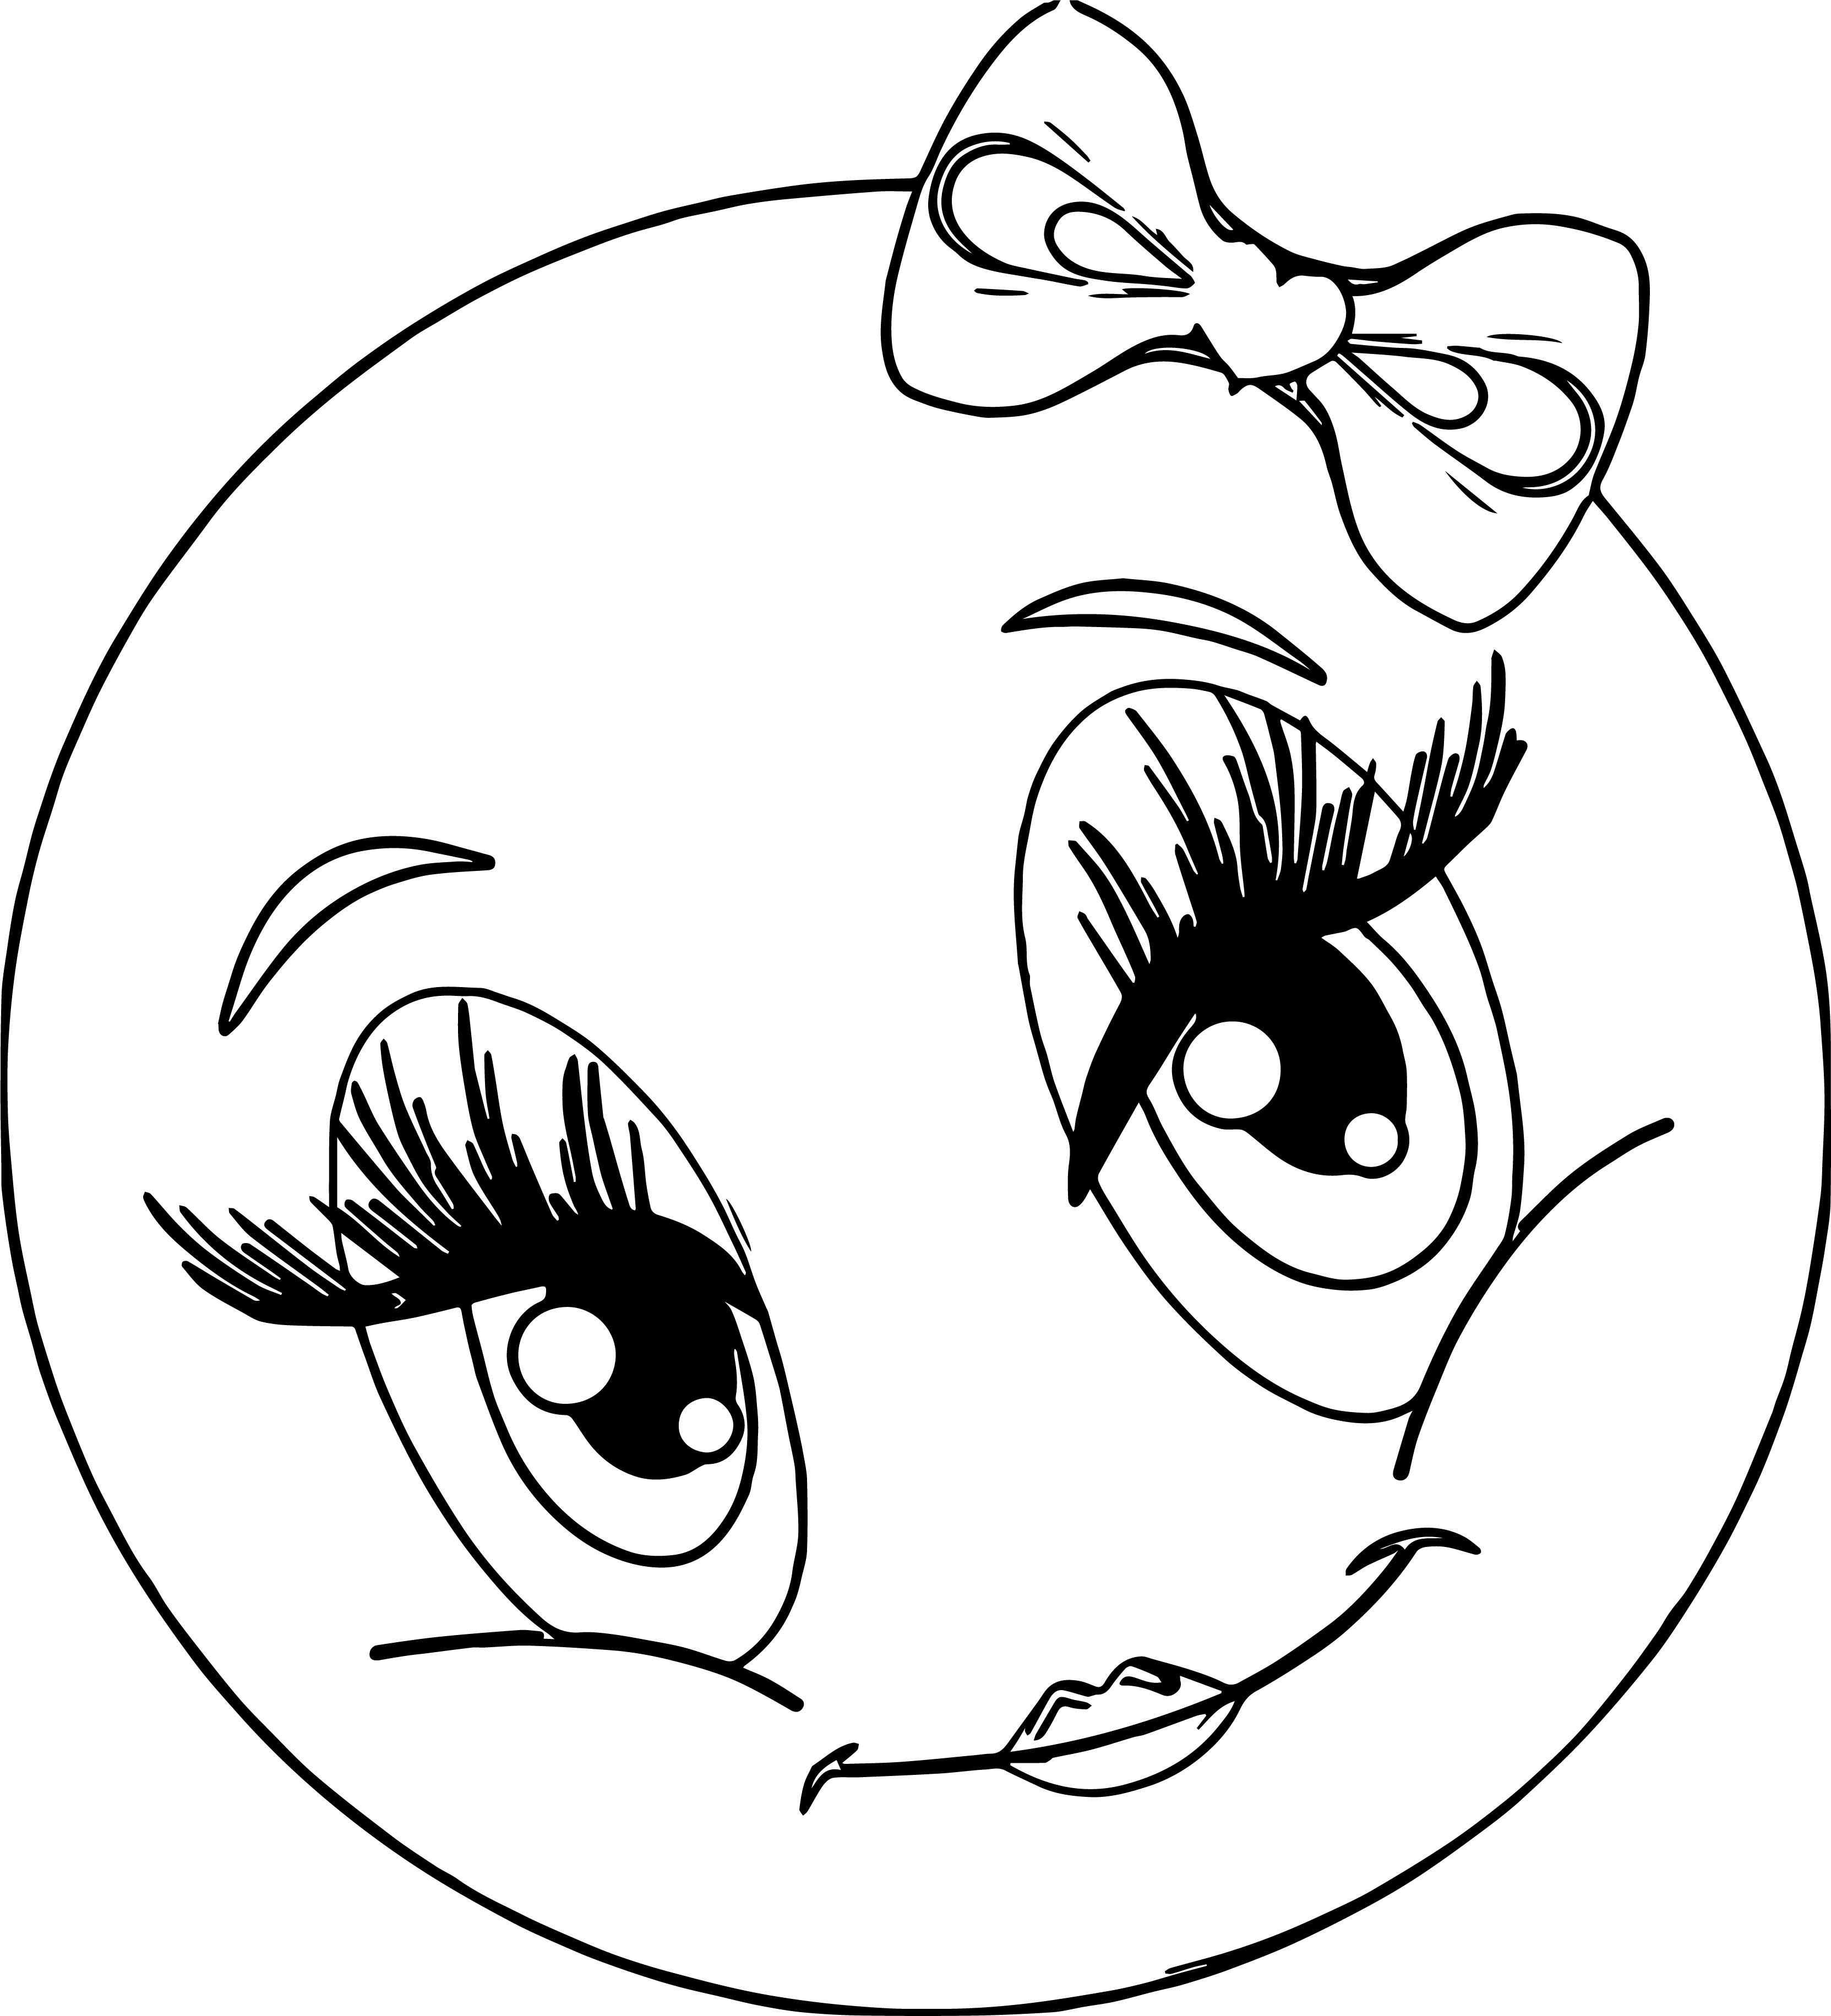 Girl Emoji Coloring Pages
 Cute Girl Smiley Faces Coloring Page